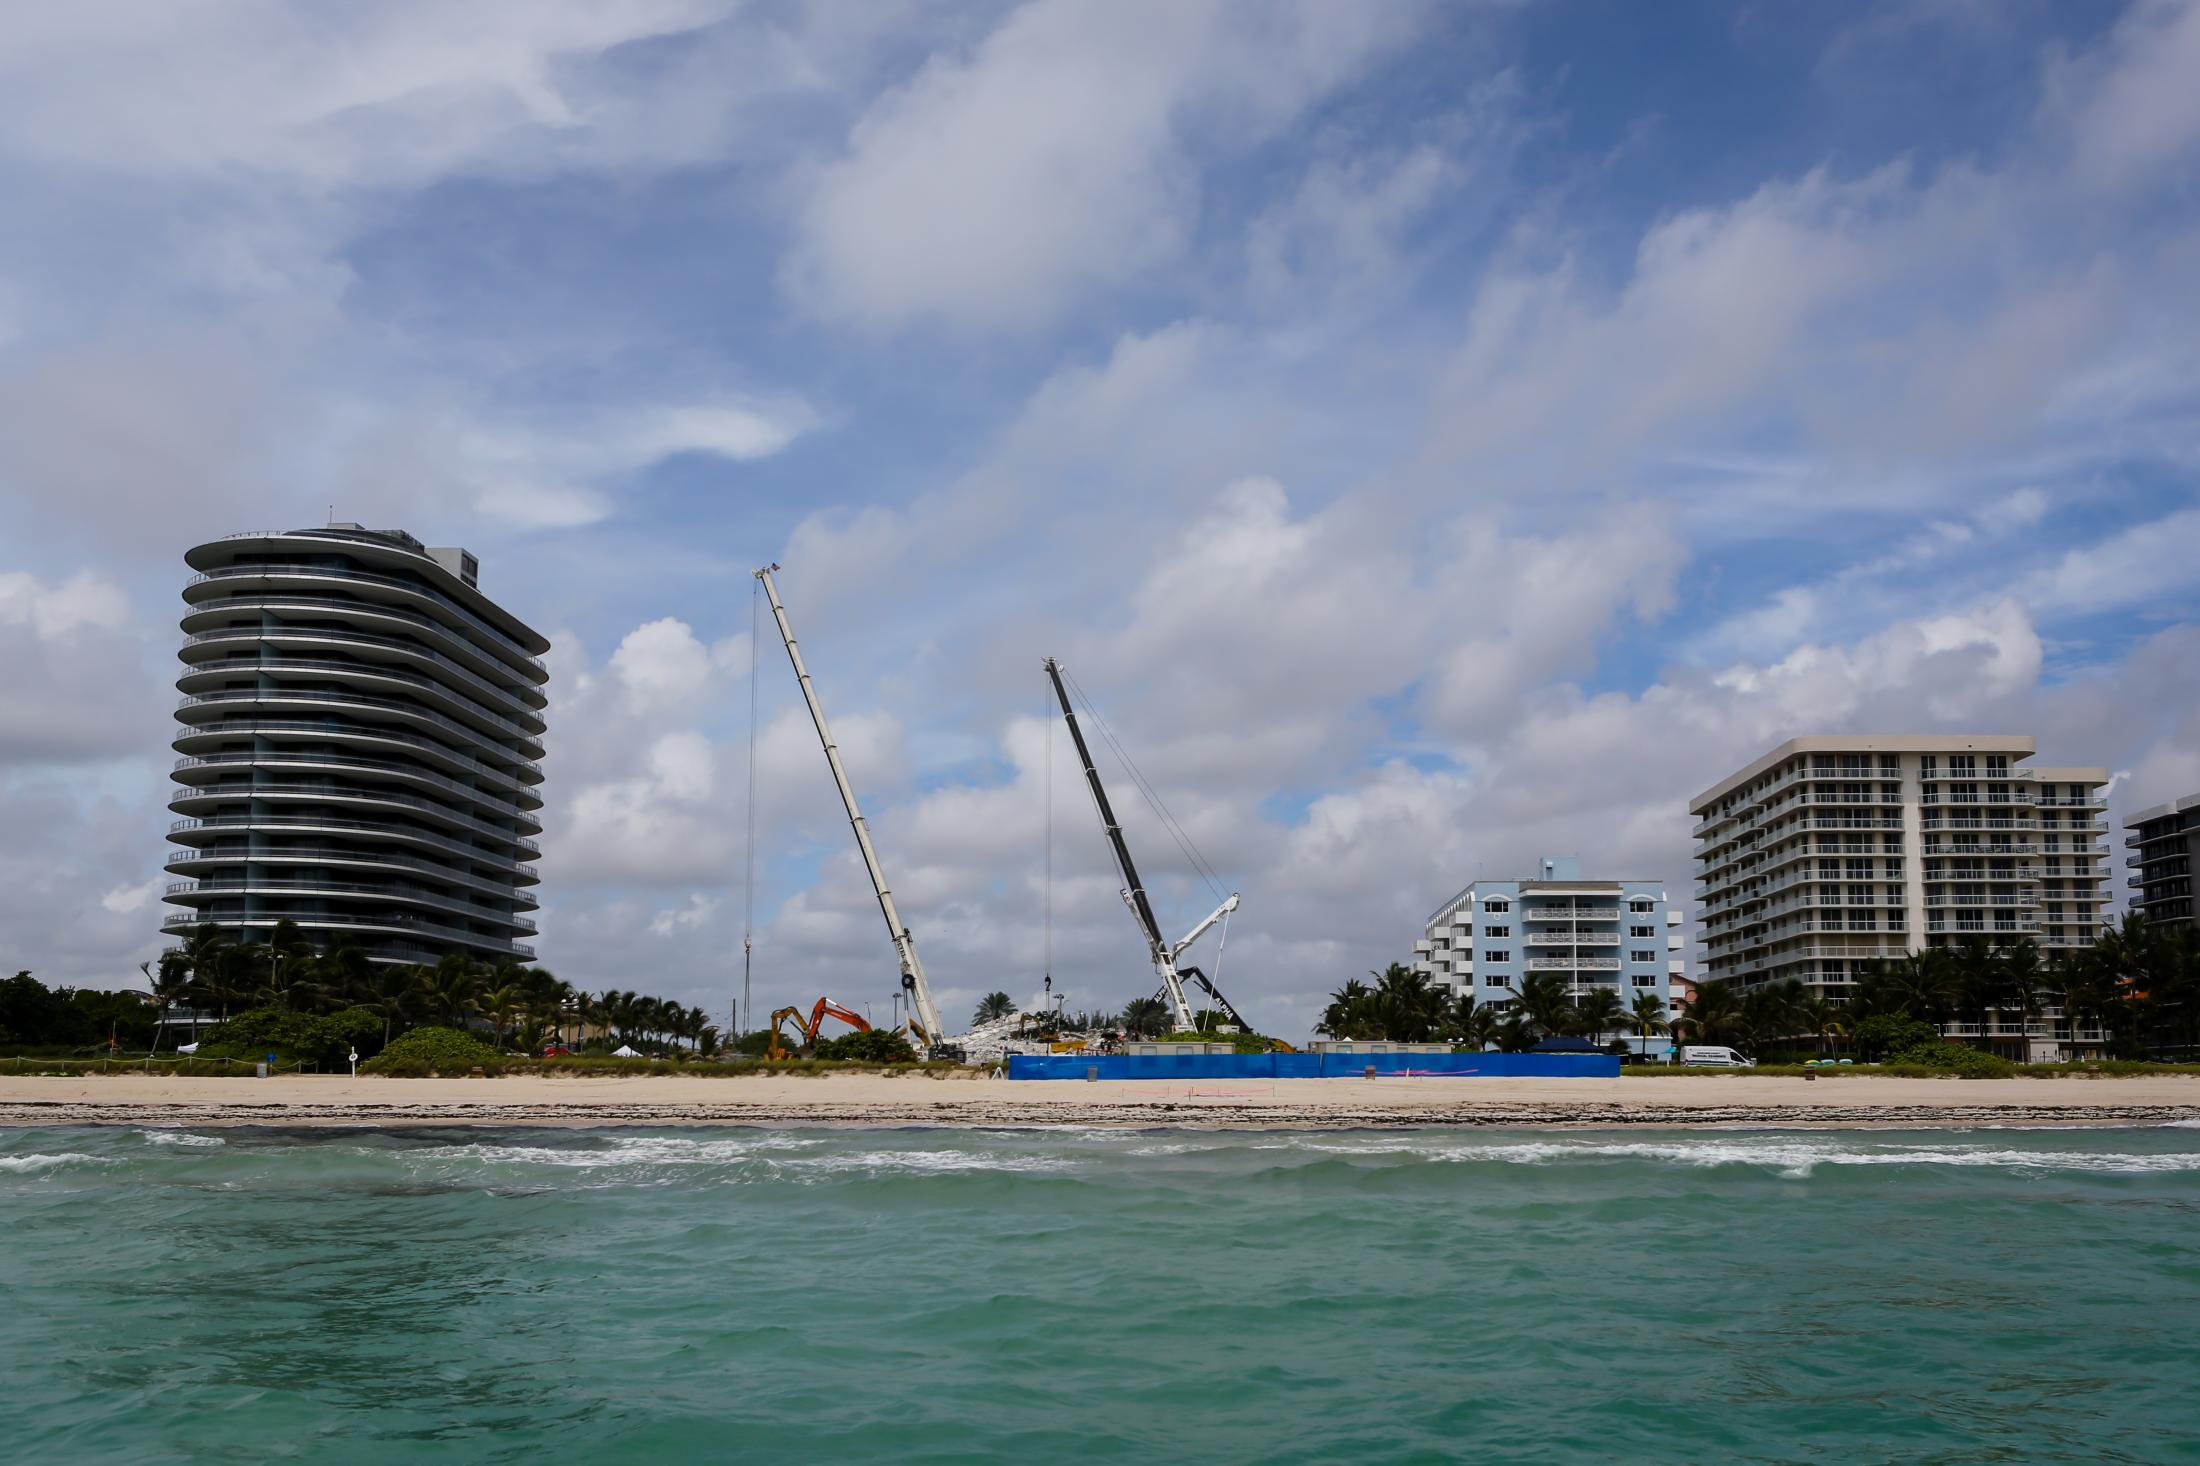 2021 - Surfside building collapsed - FLORIDA, USA - JULY 05: A view of the skyline after the...